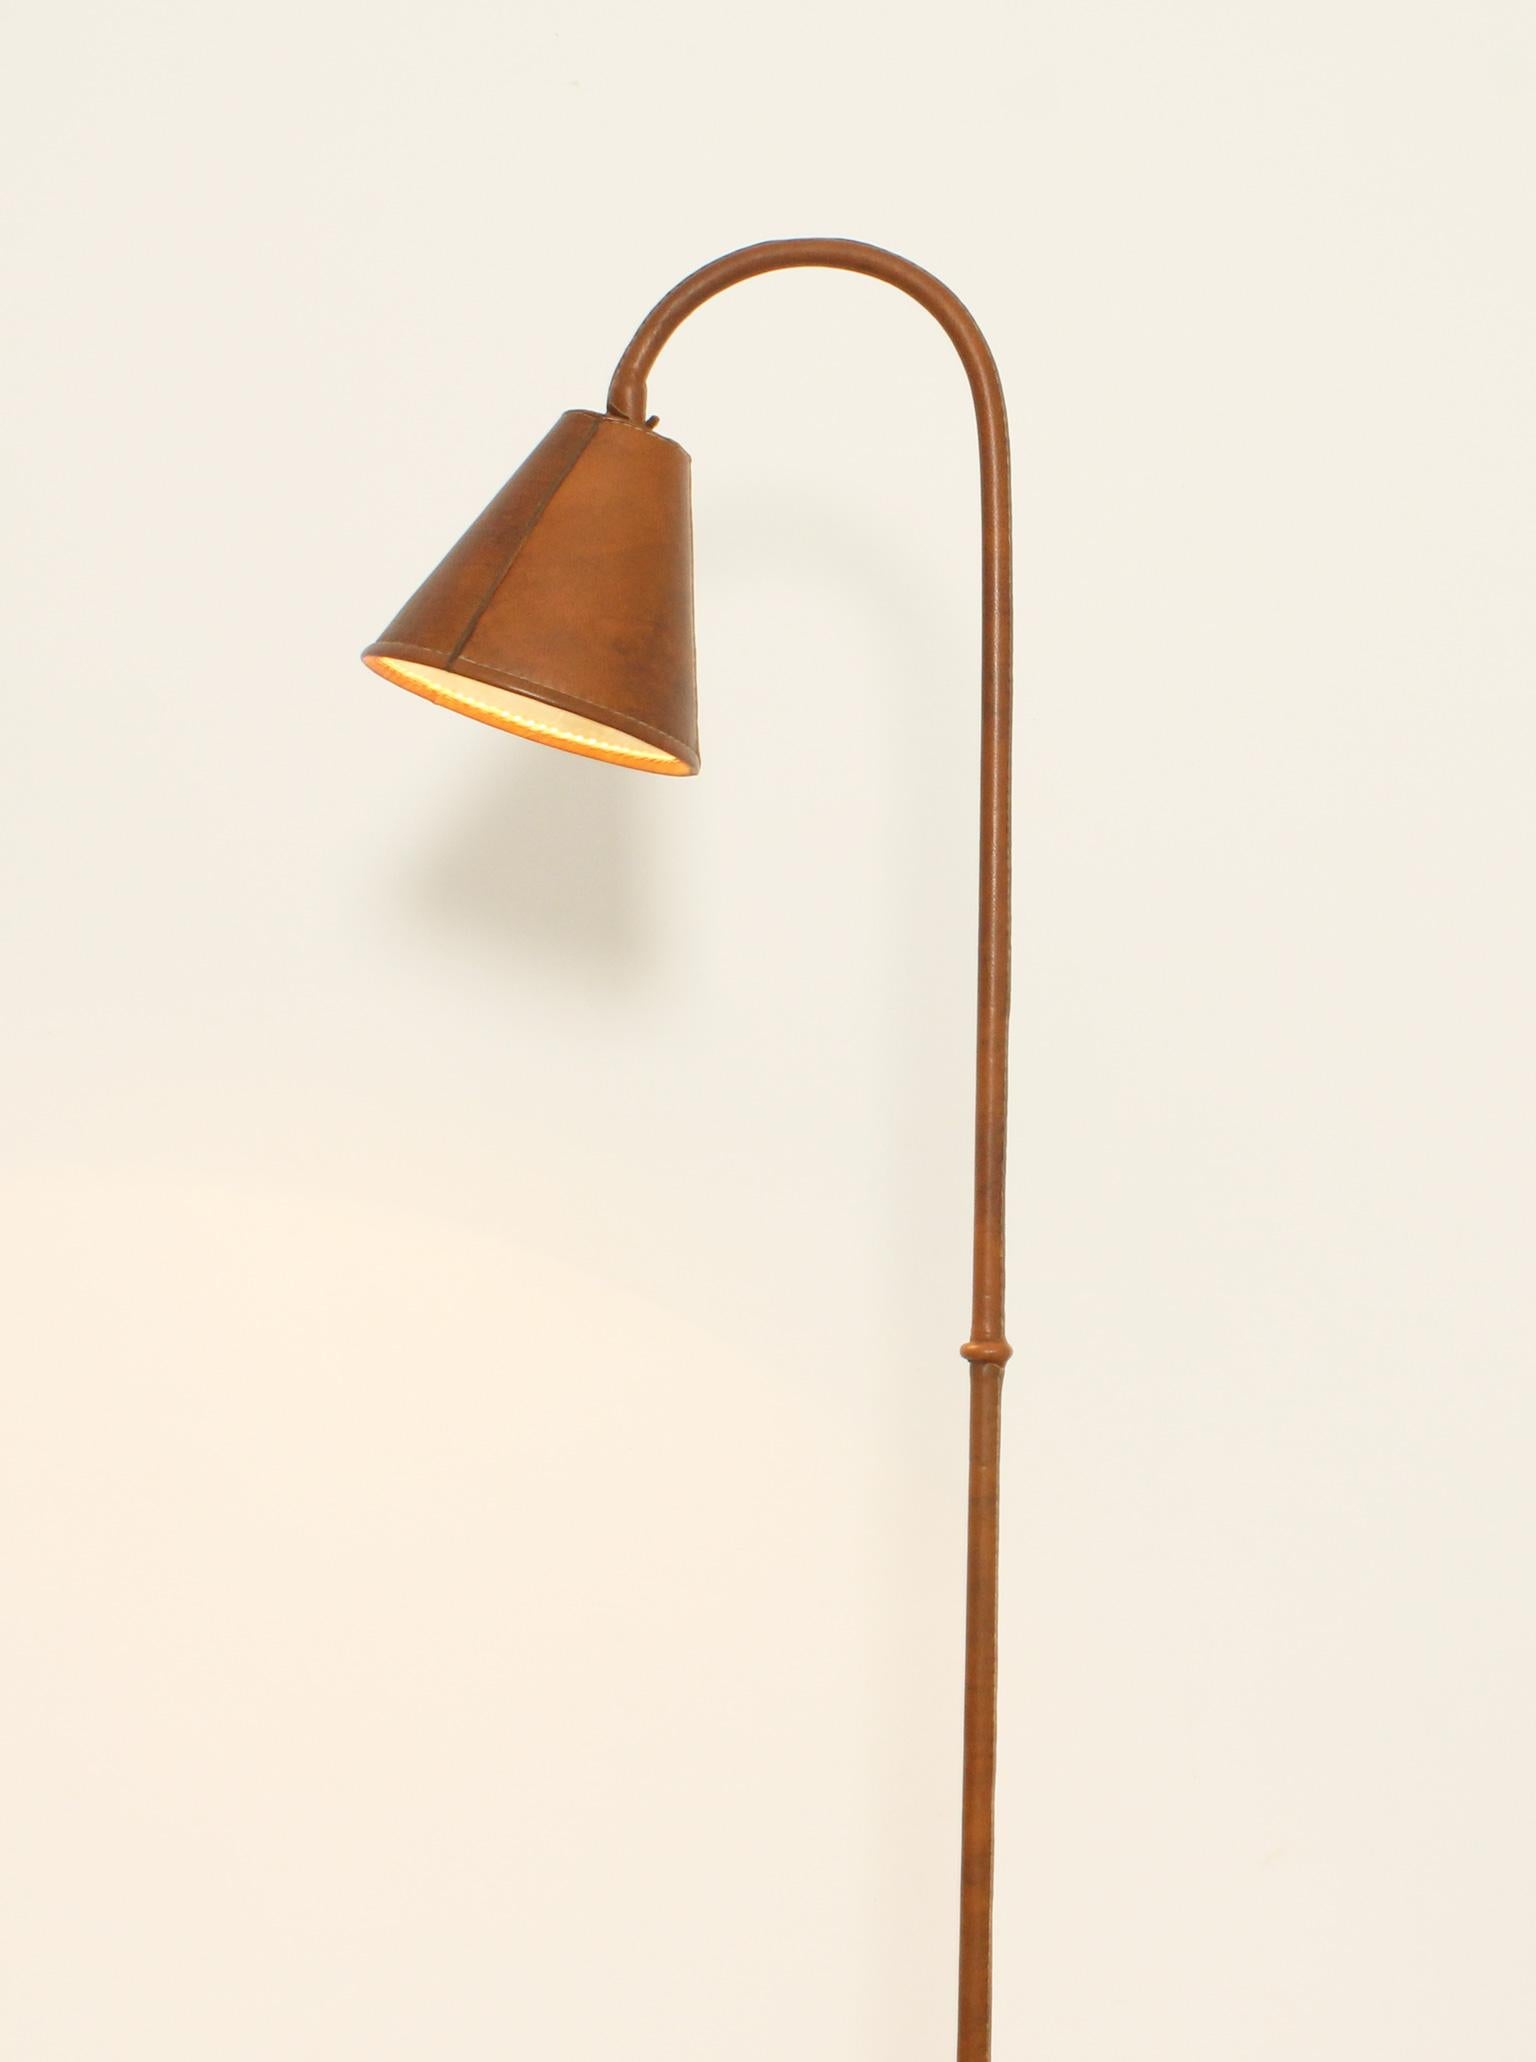 Floor Lamp by Valenti in Brown Leather, Spain, 1950's For Sale 7